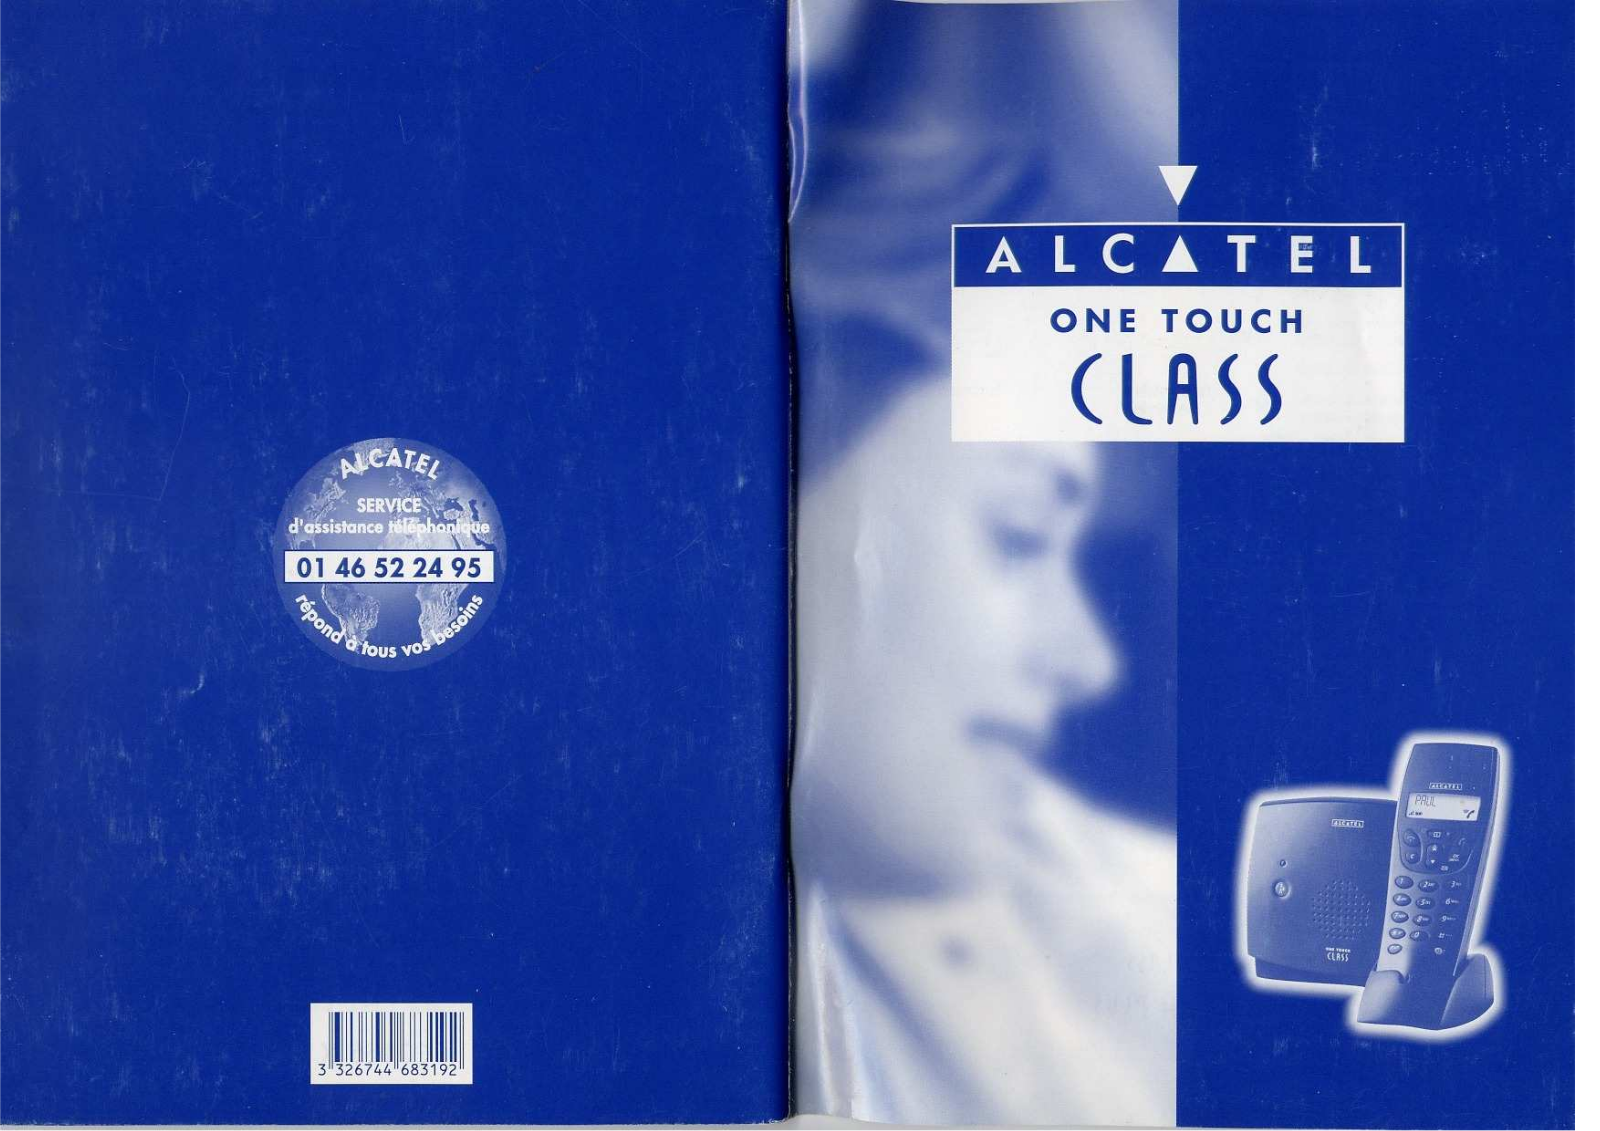 Alcatel ONE TOUCH CLASS User Manual